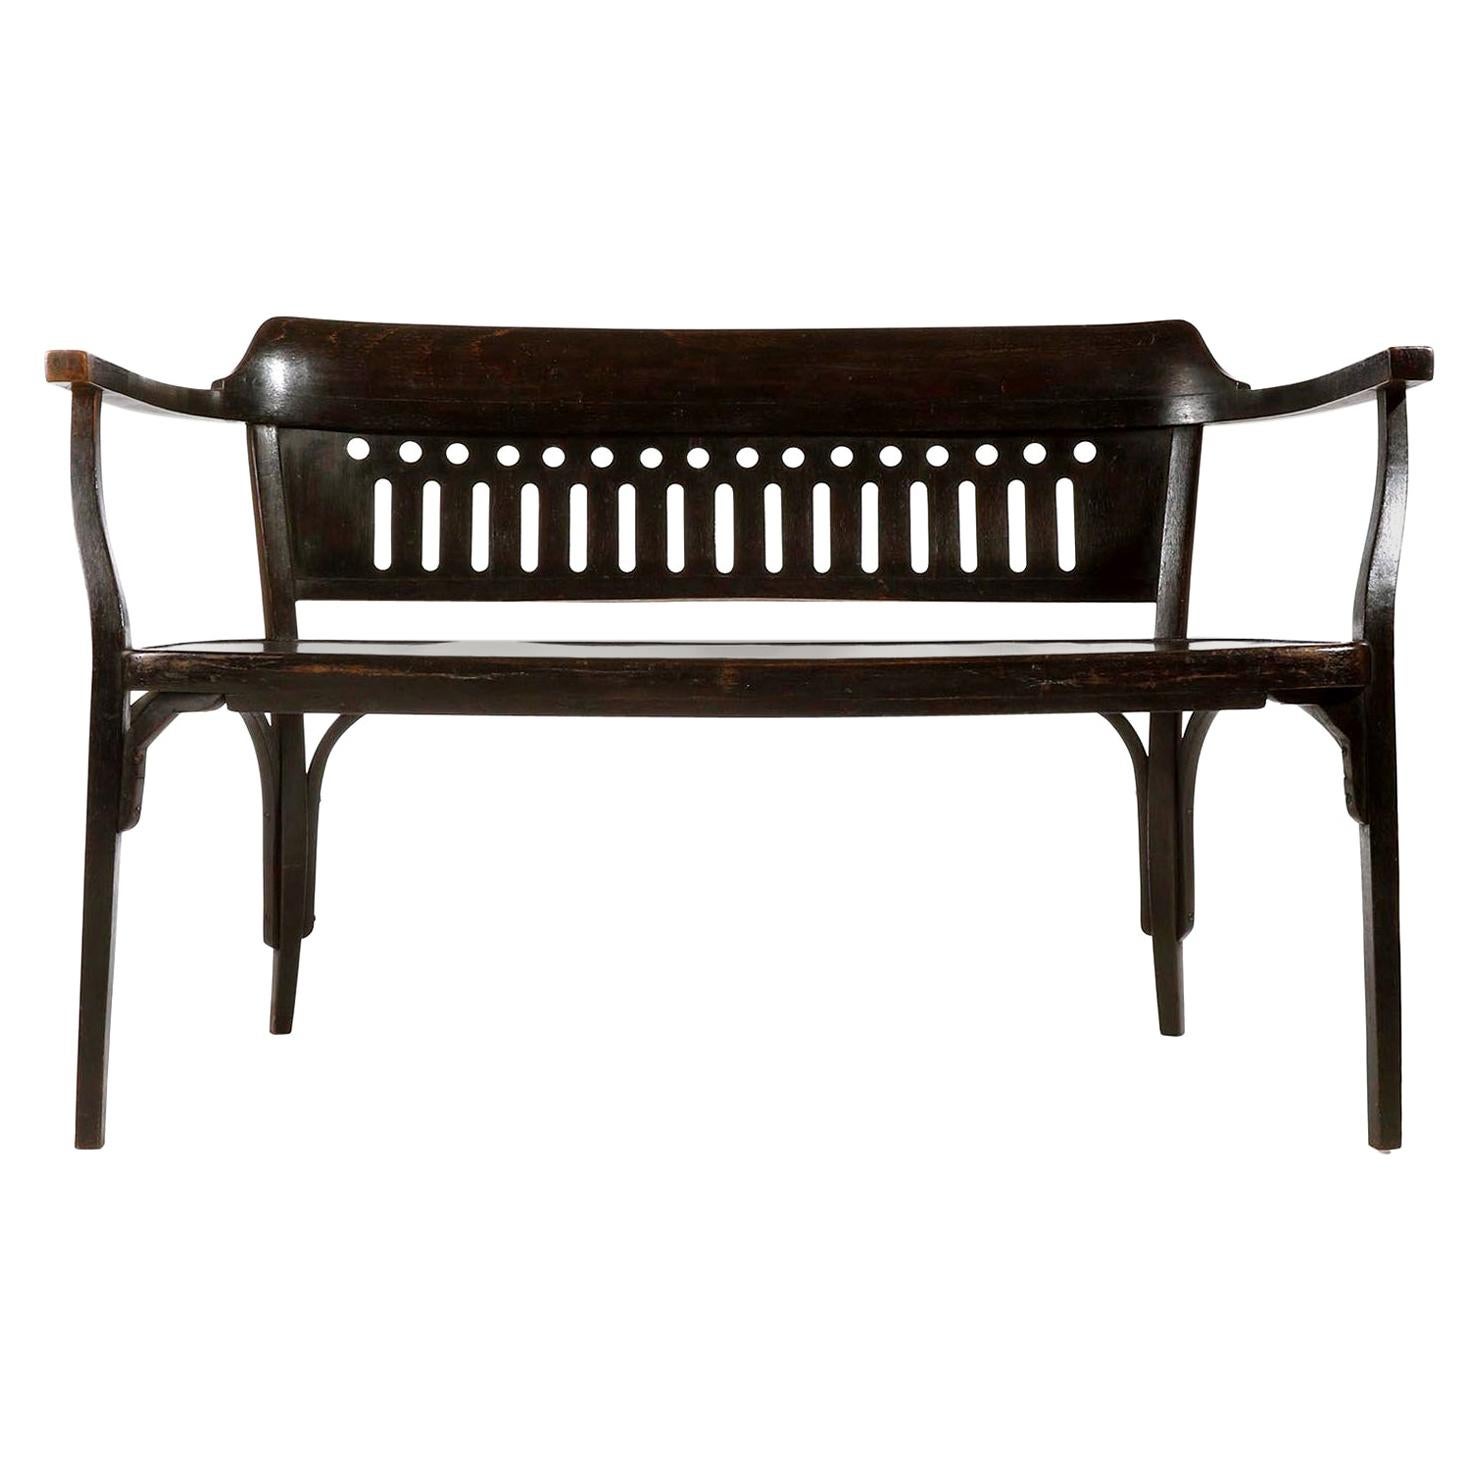 Otto Wagner Settee Bench Bentwood, Thonet, Austria, Vienna Secession, circa 1905